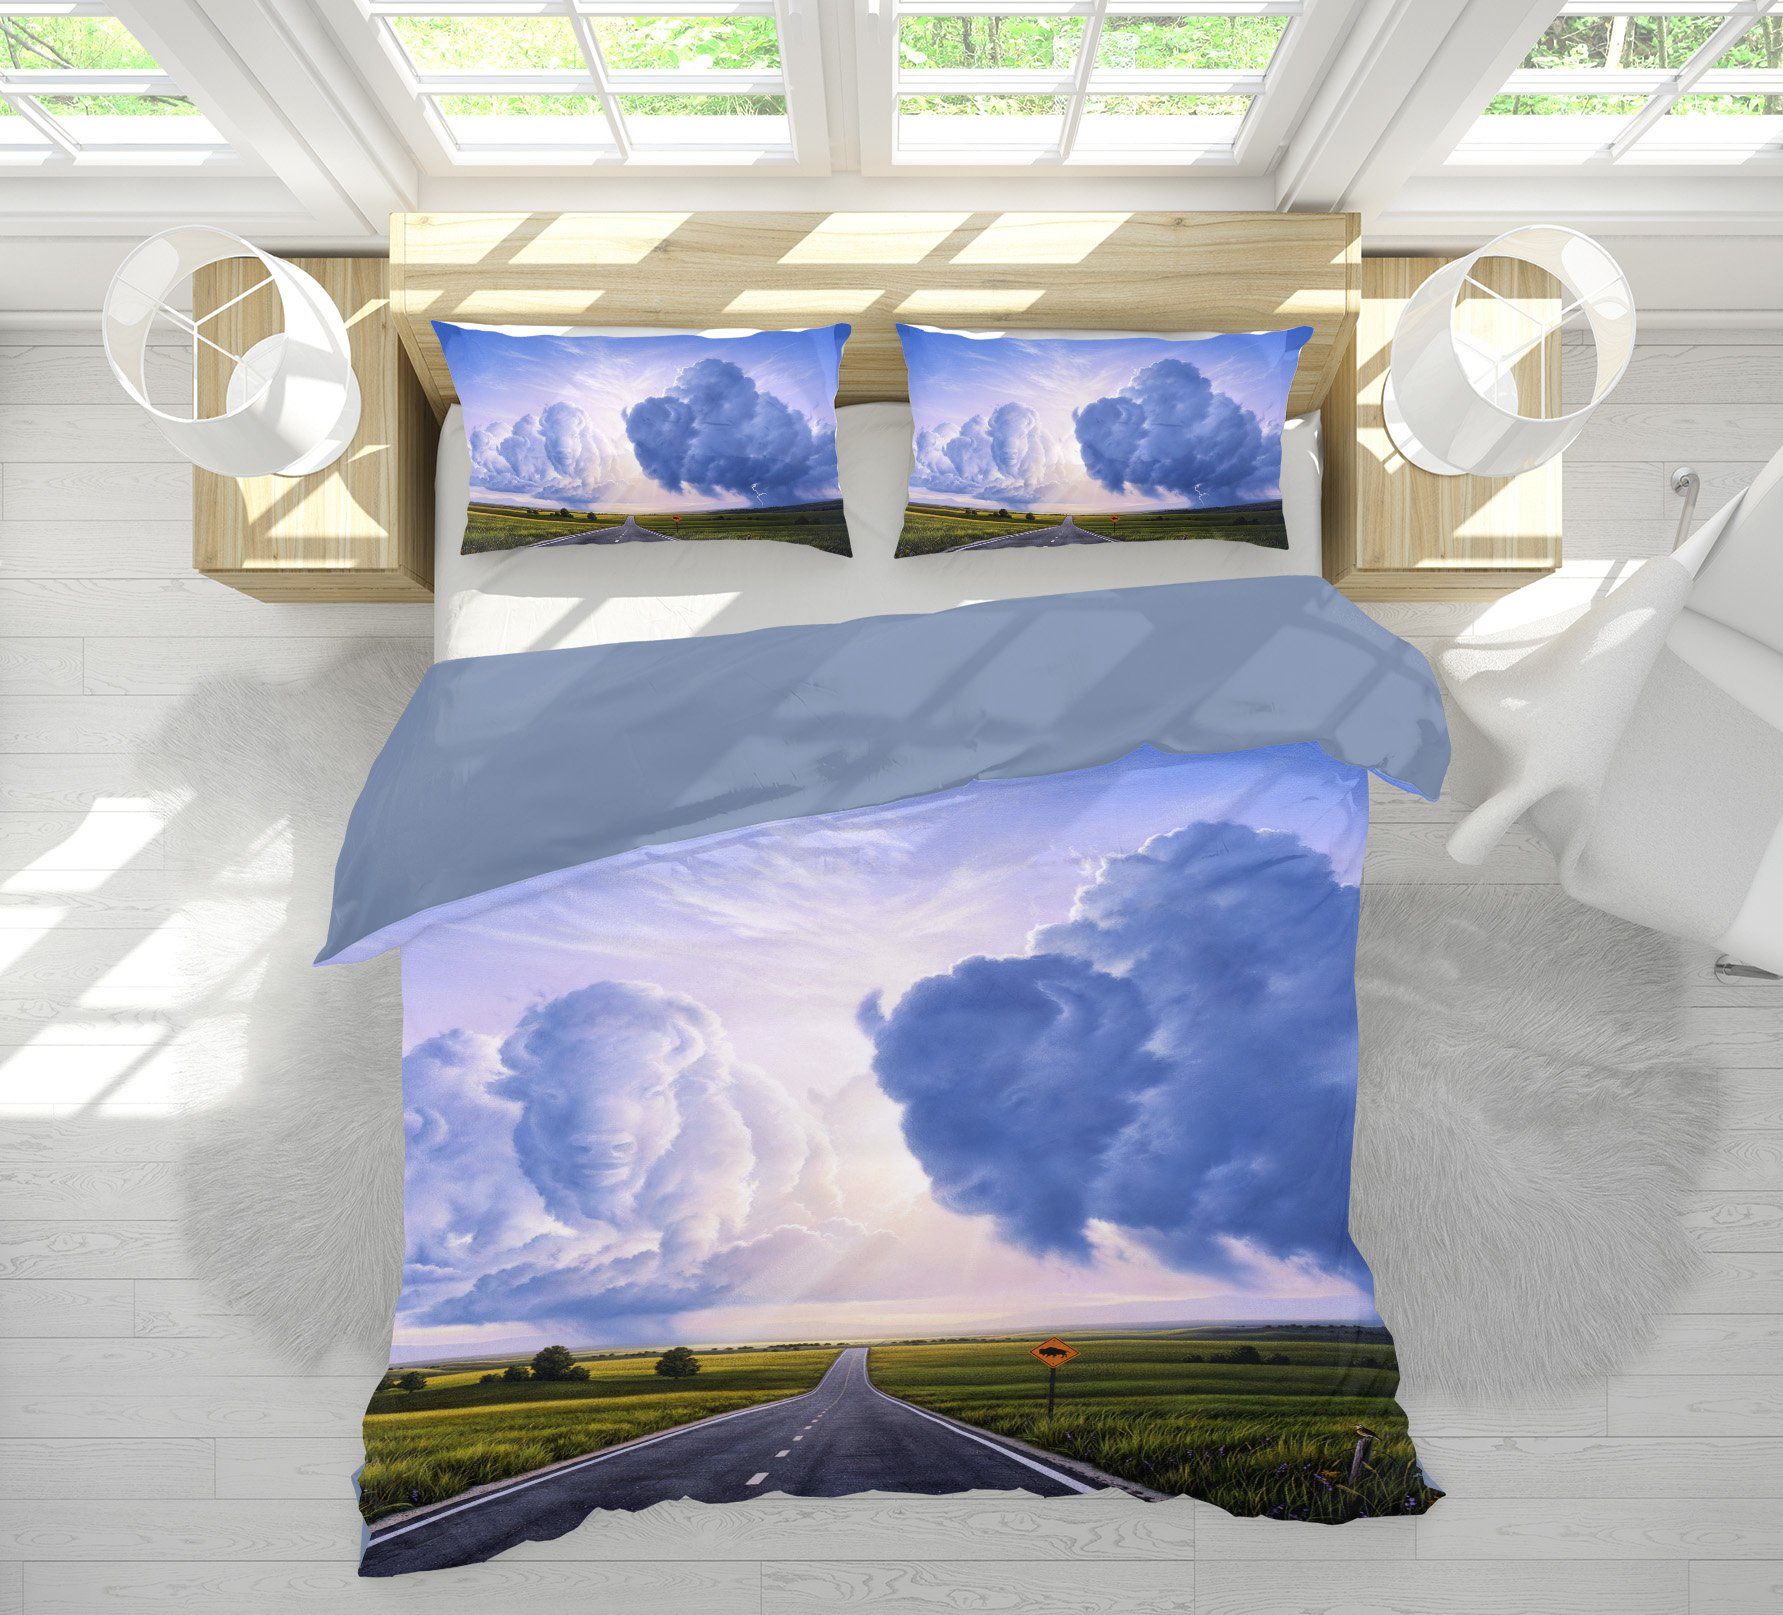 3D Buffalo Crossing 2115 Jerry LoFaro bedding Bed Pillowcases Quilt Quiet Covers AJ Creativity Home 